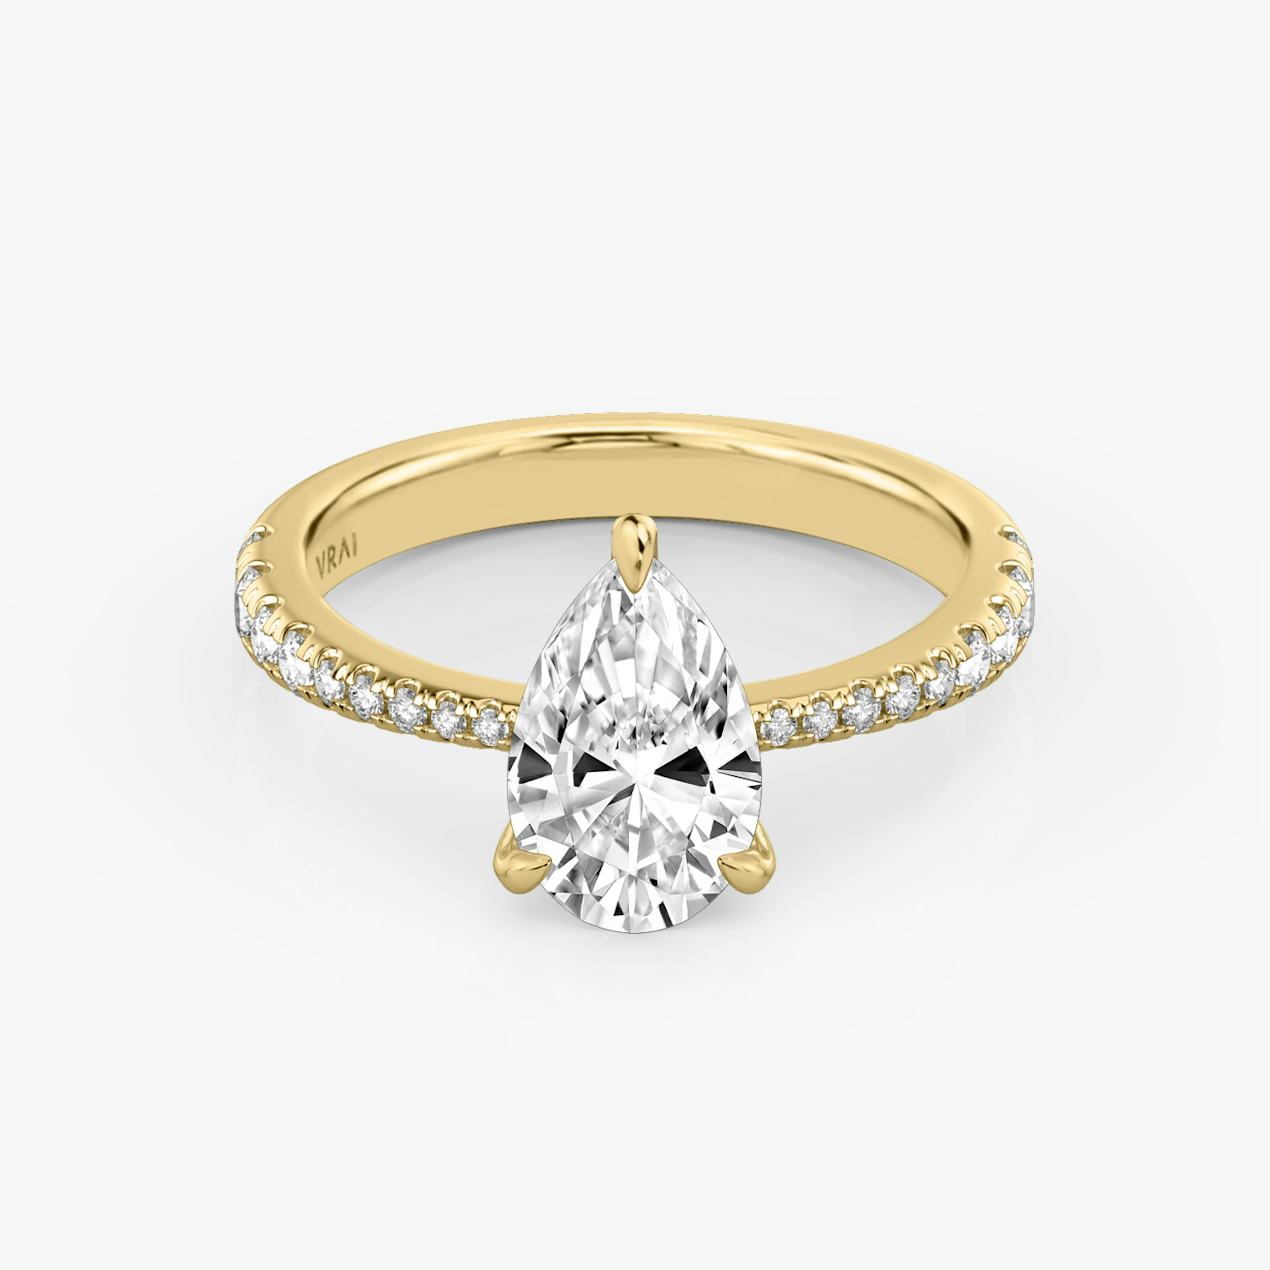 The Tapered Classic Pear Engagement Ring